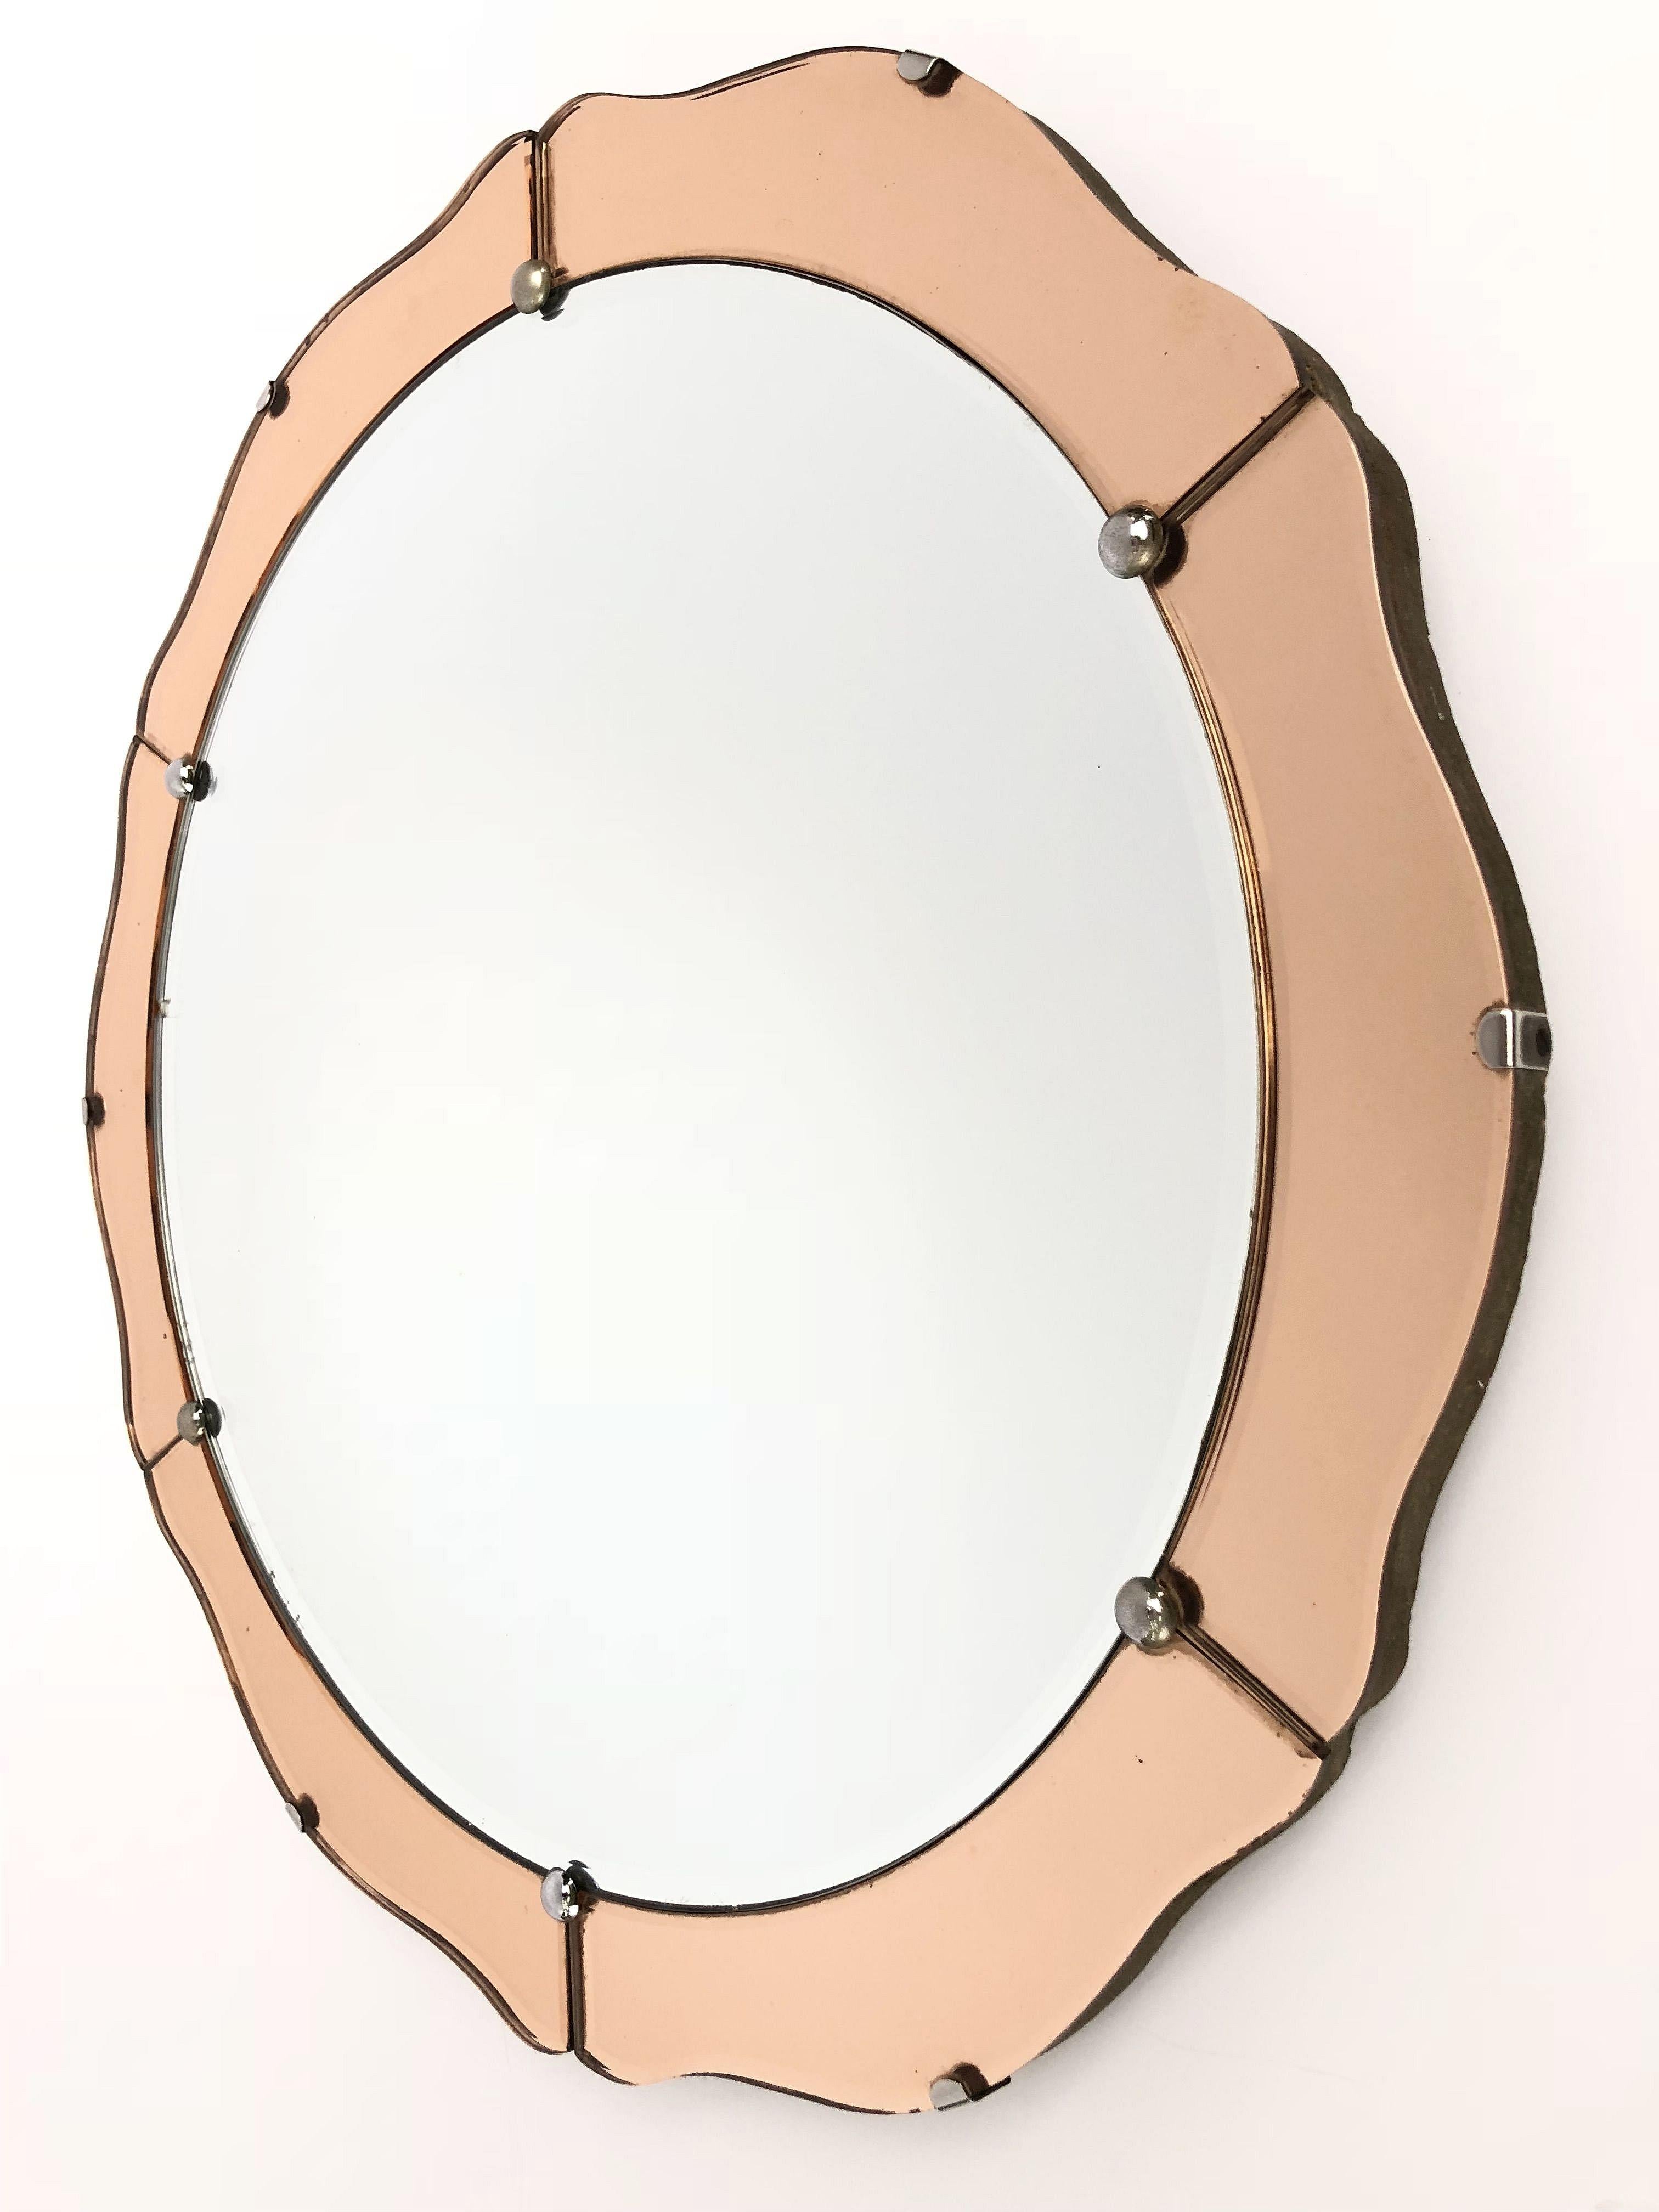 A fine English round or circular mirror from the Art Deco period, featuring a serpentine edge of reflective copper colored mirrored glass around a mirrored glass centre, mounted to a wood backing.

Measures: Diameter 19 3/4 inches